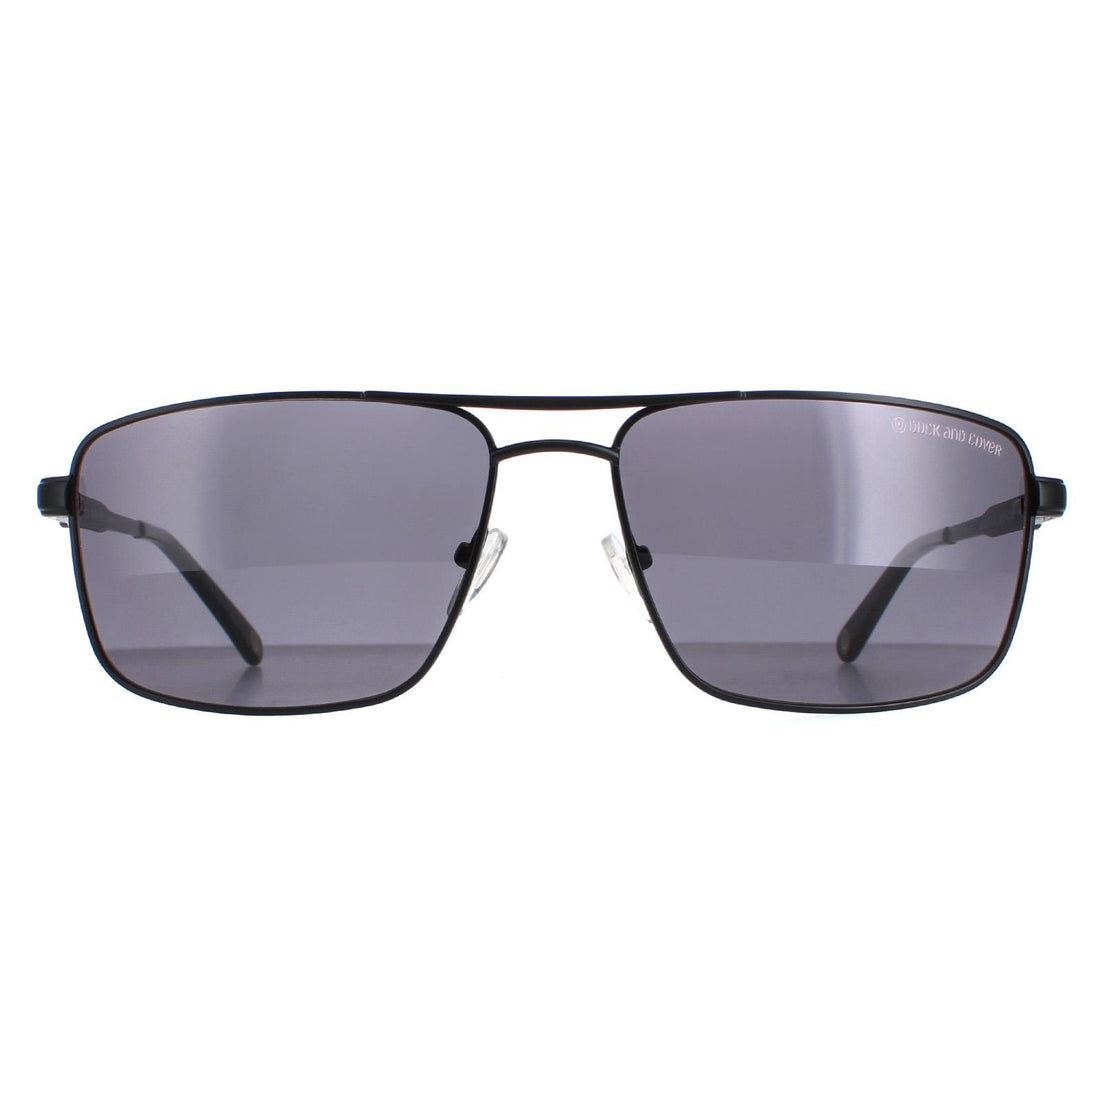 Duck and Cover DCS020 Sunglasses Black / Grey